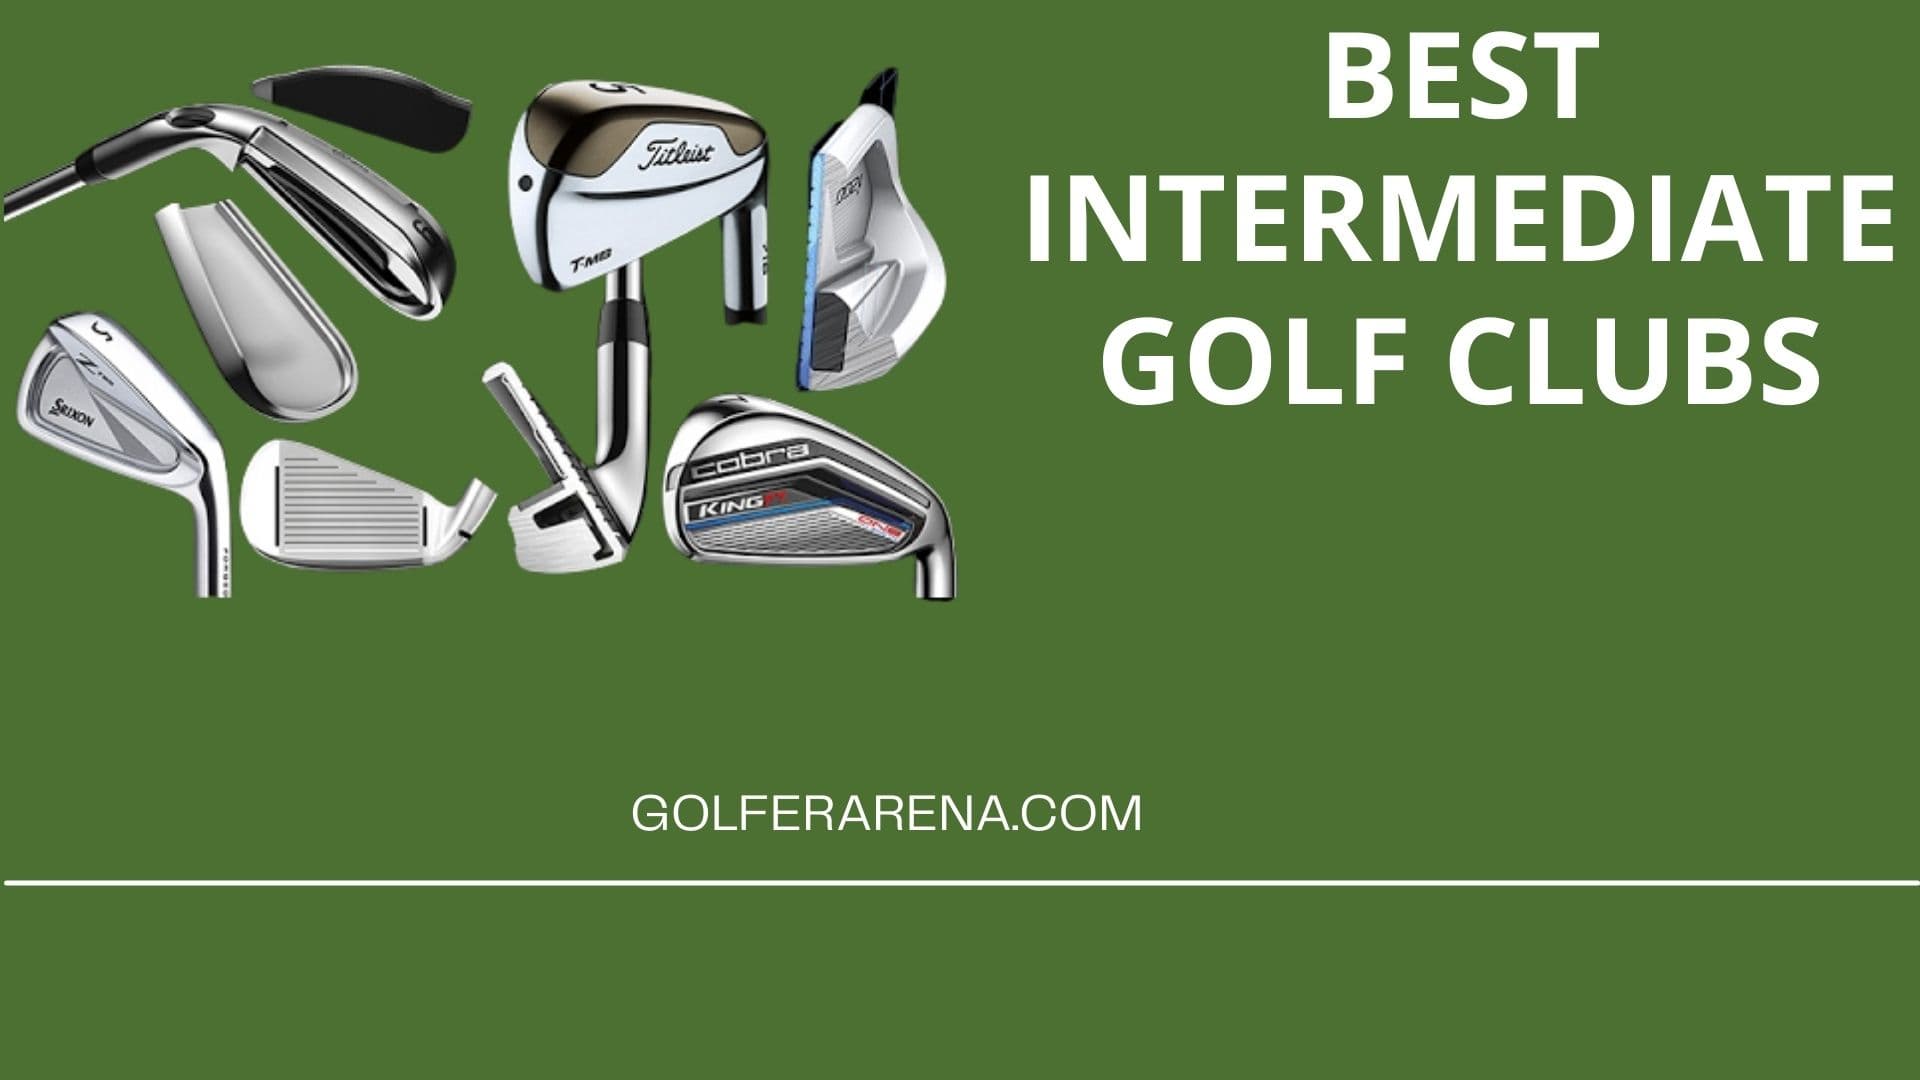 Top 5 Best Intermediate Golf Clubs 2022 Reviews & Buying Guide 2022